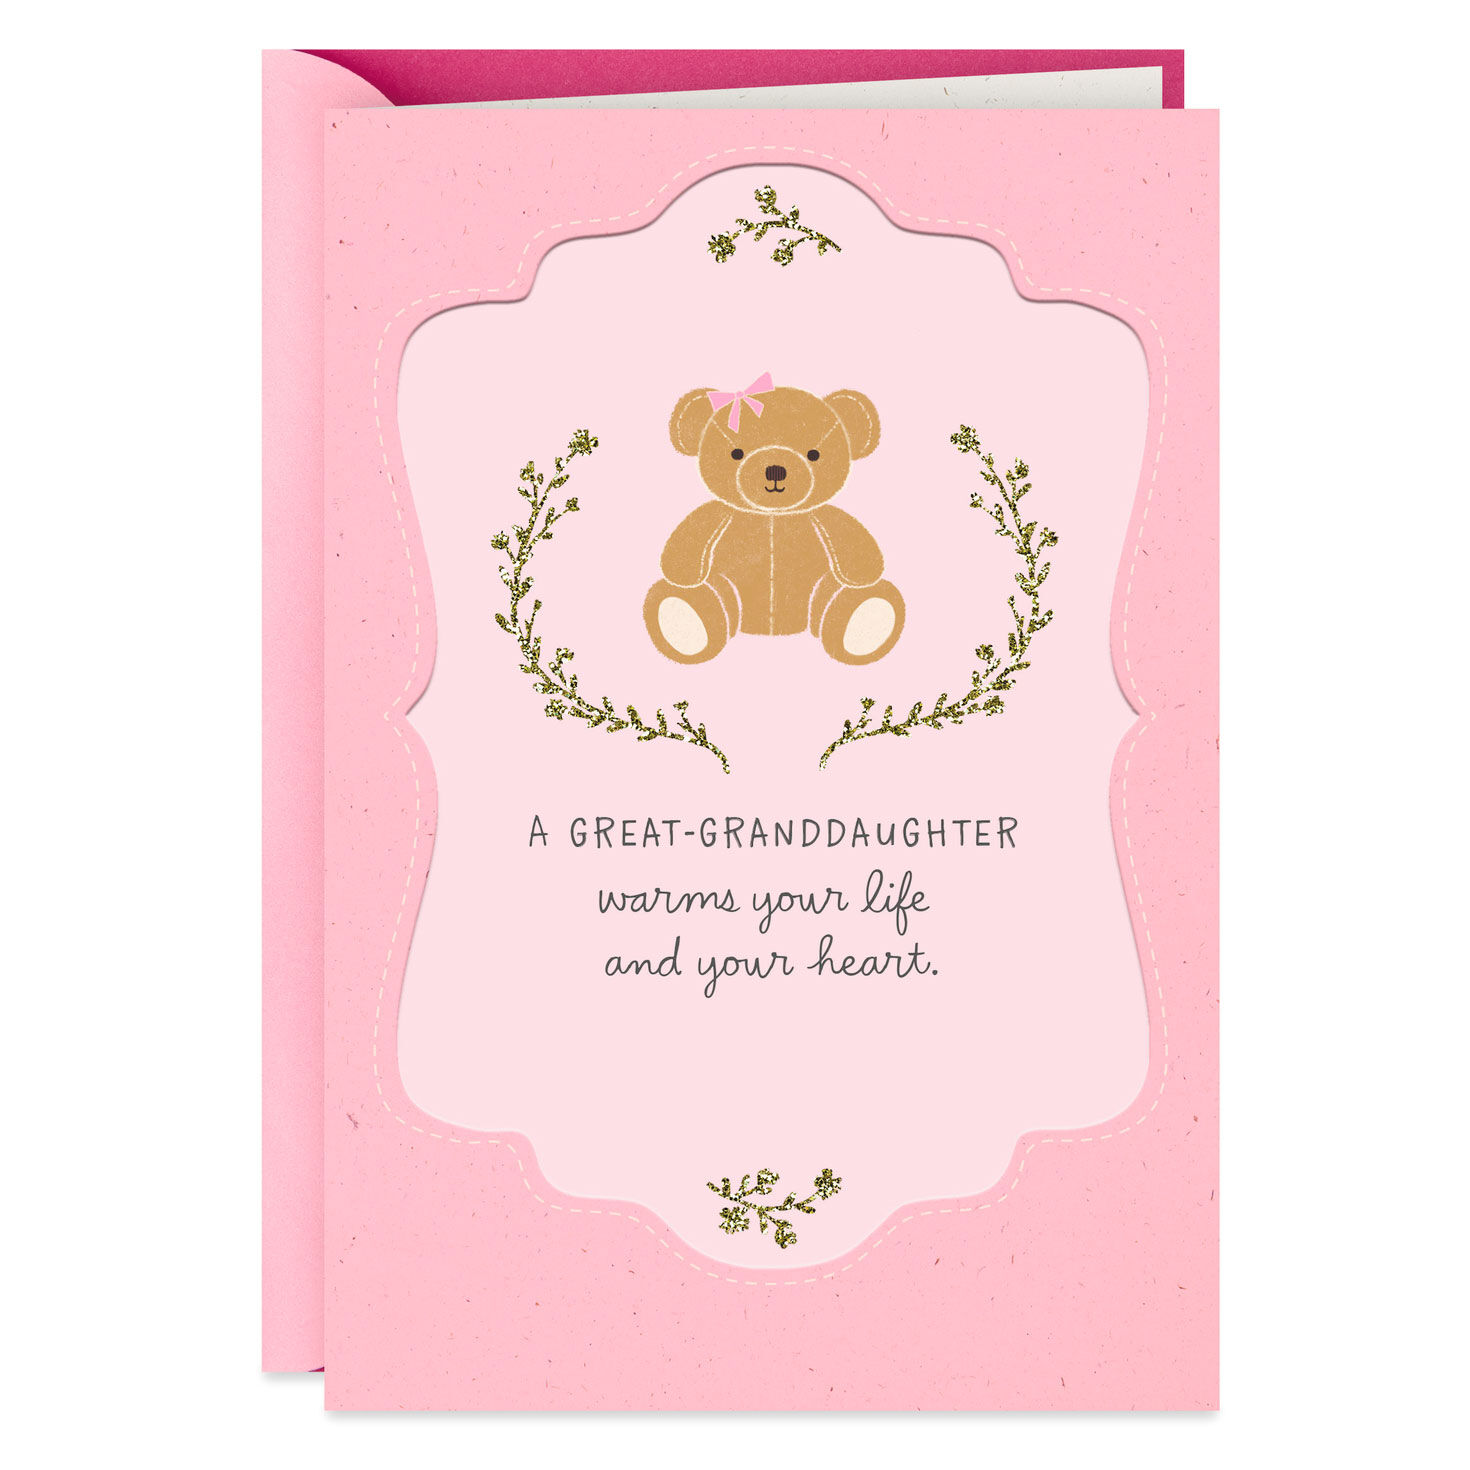 Prelude New Baby Card ~ On The Birth Of Your Lovely Granddaughter ~ Baby Bear Card For The New Grandparents Size 20cm x 14cm 